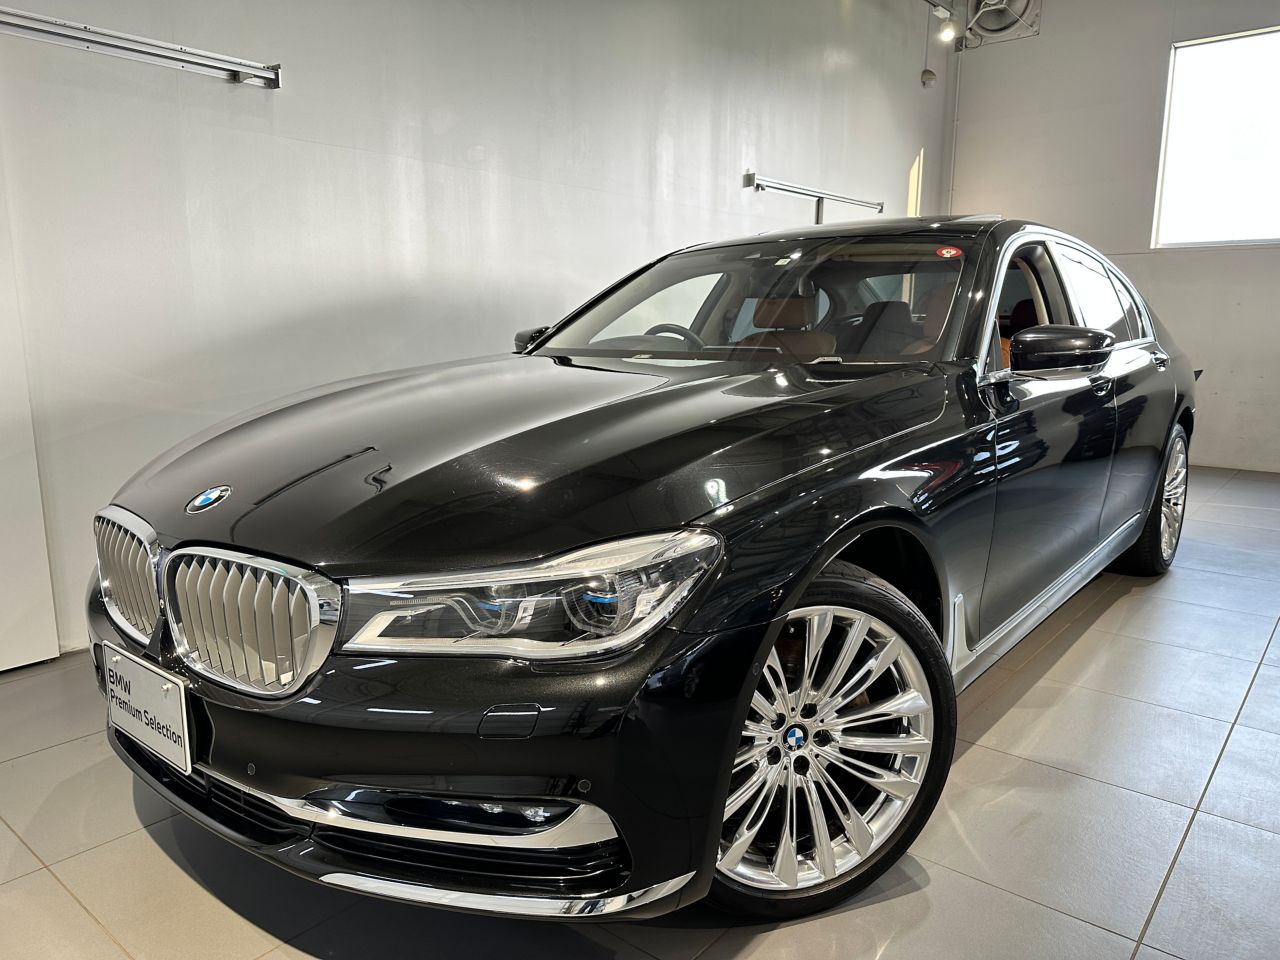 740d xDrive Excellence